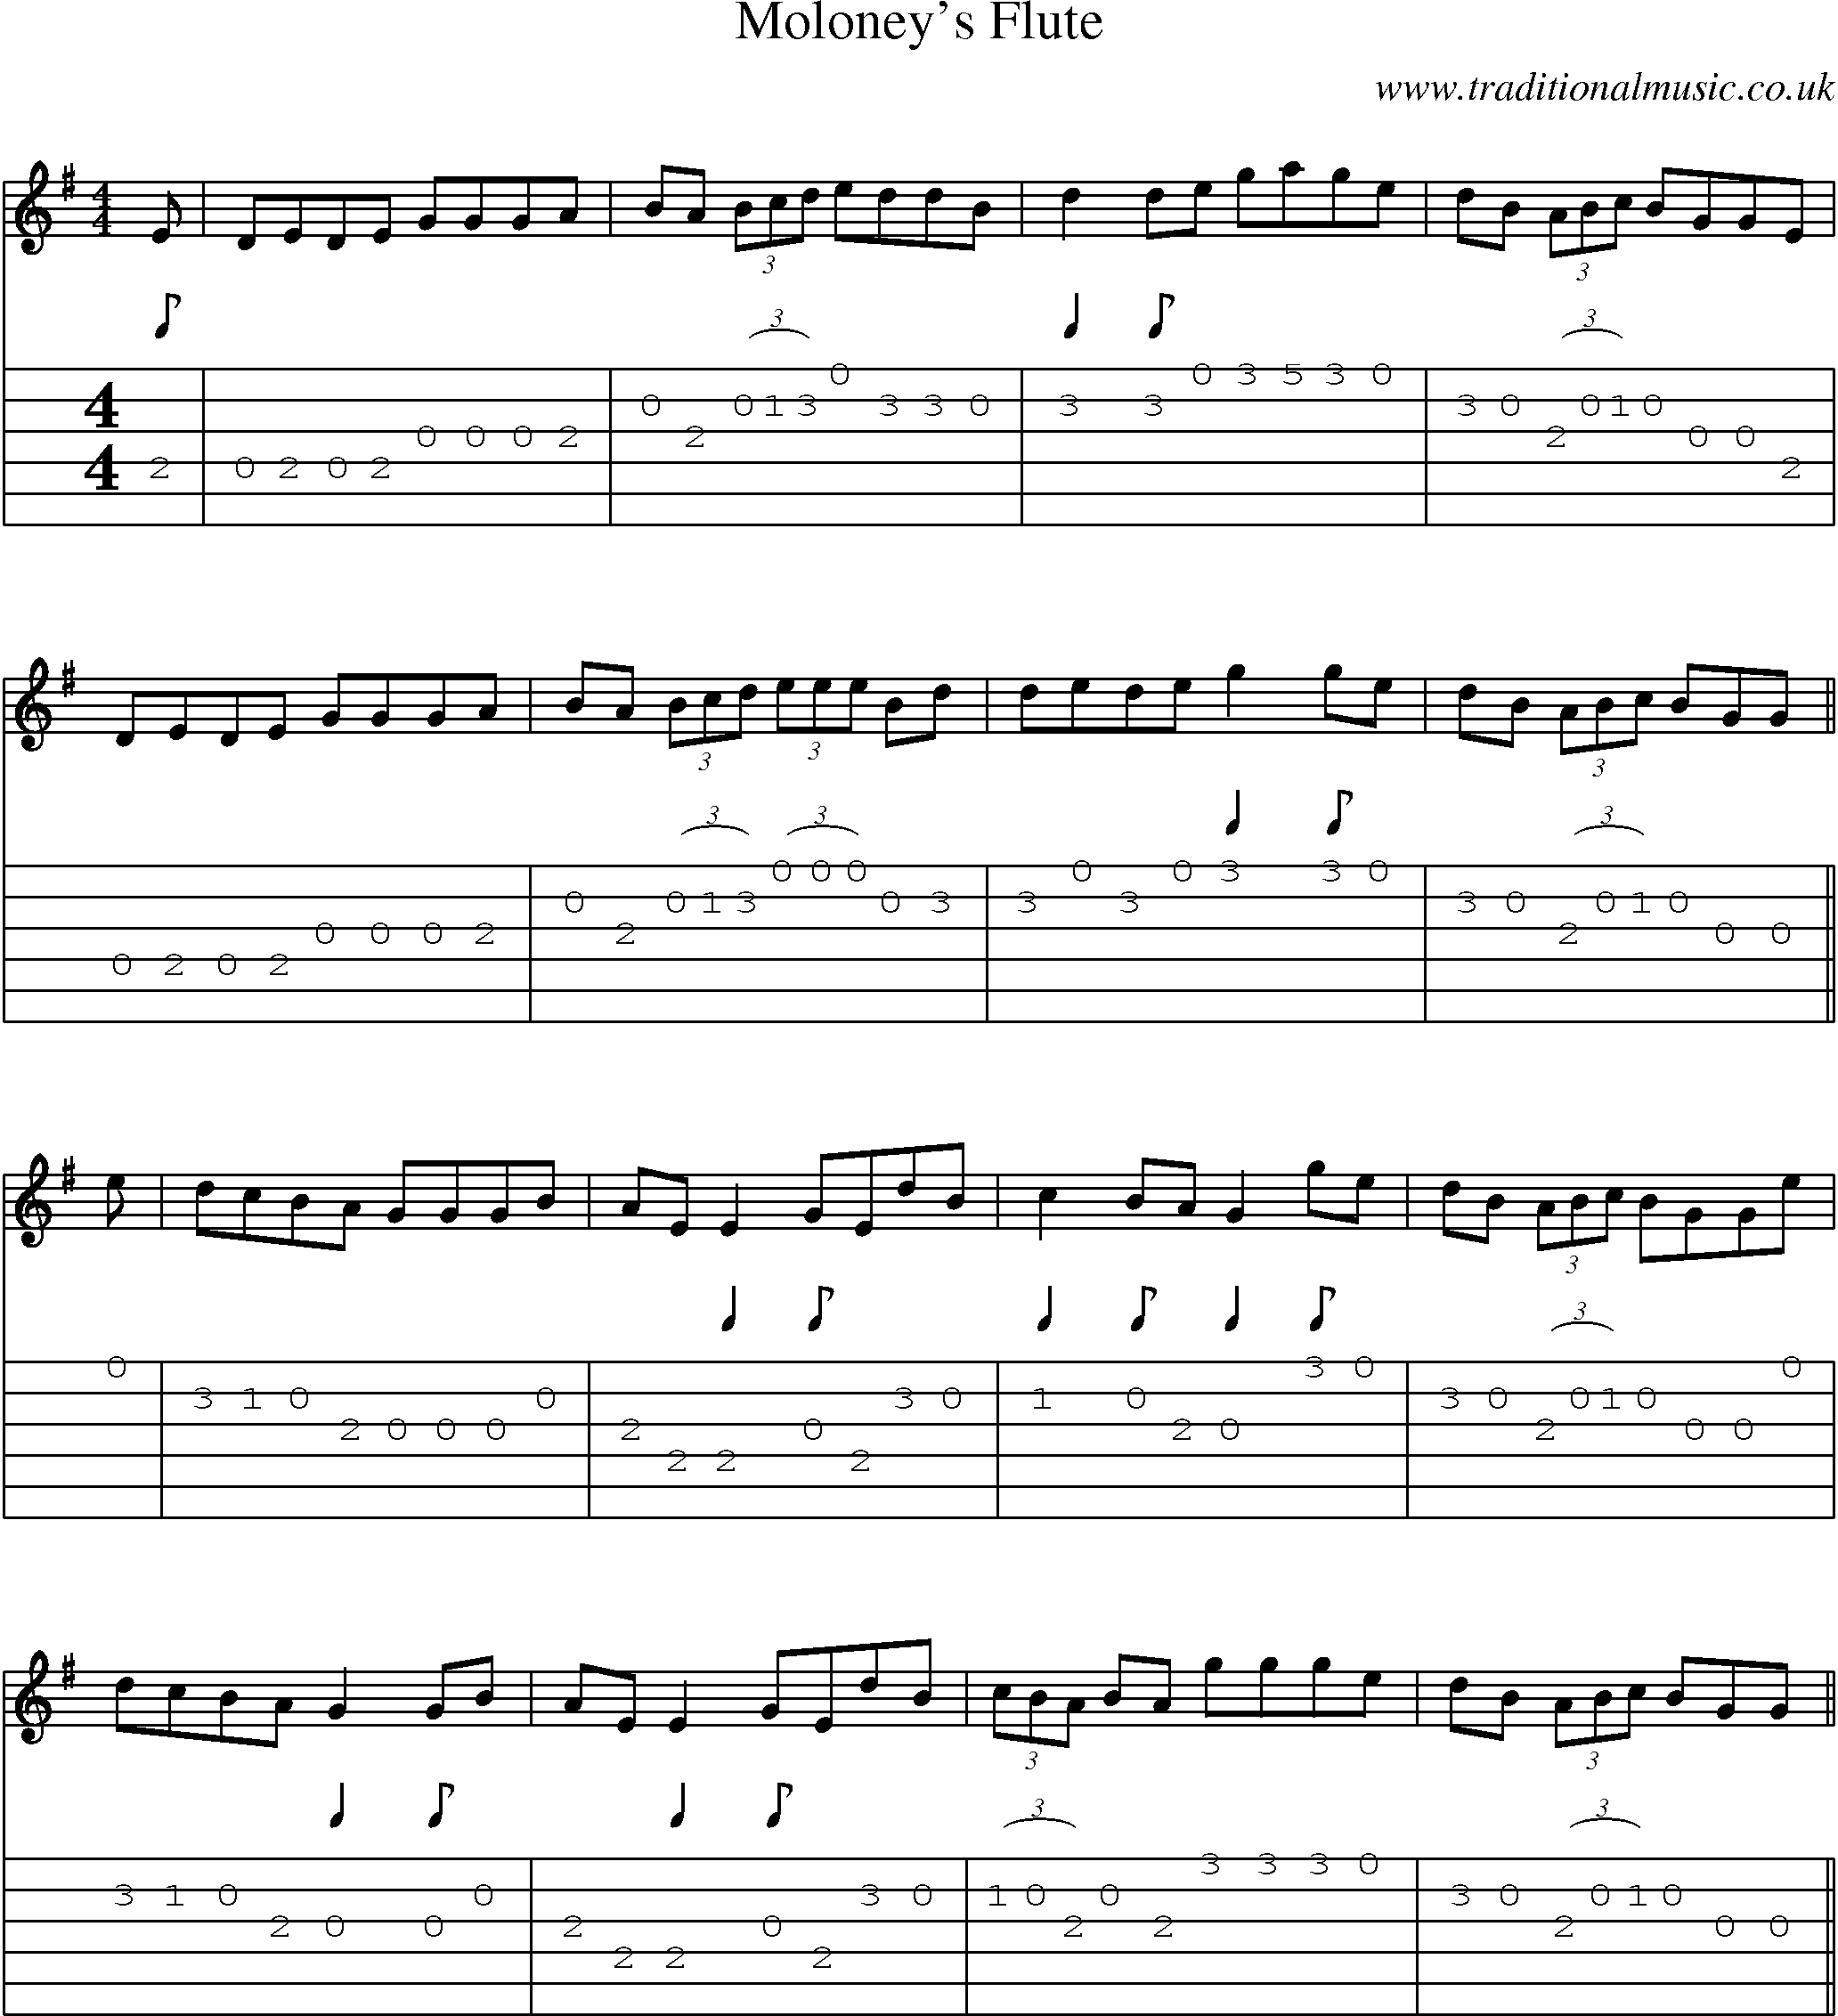 Music Score and Guitar Tabs for Moloneys Flute